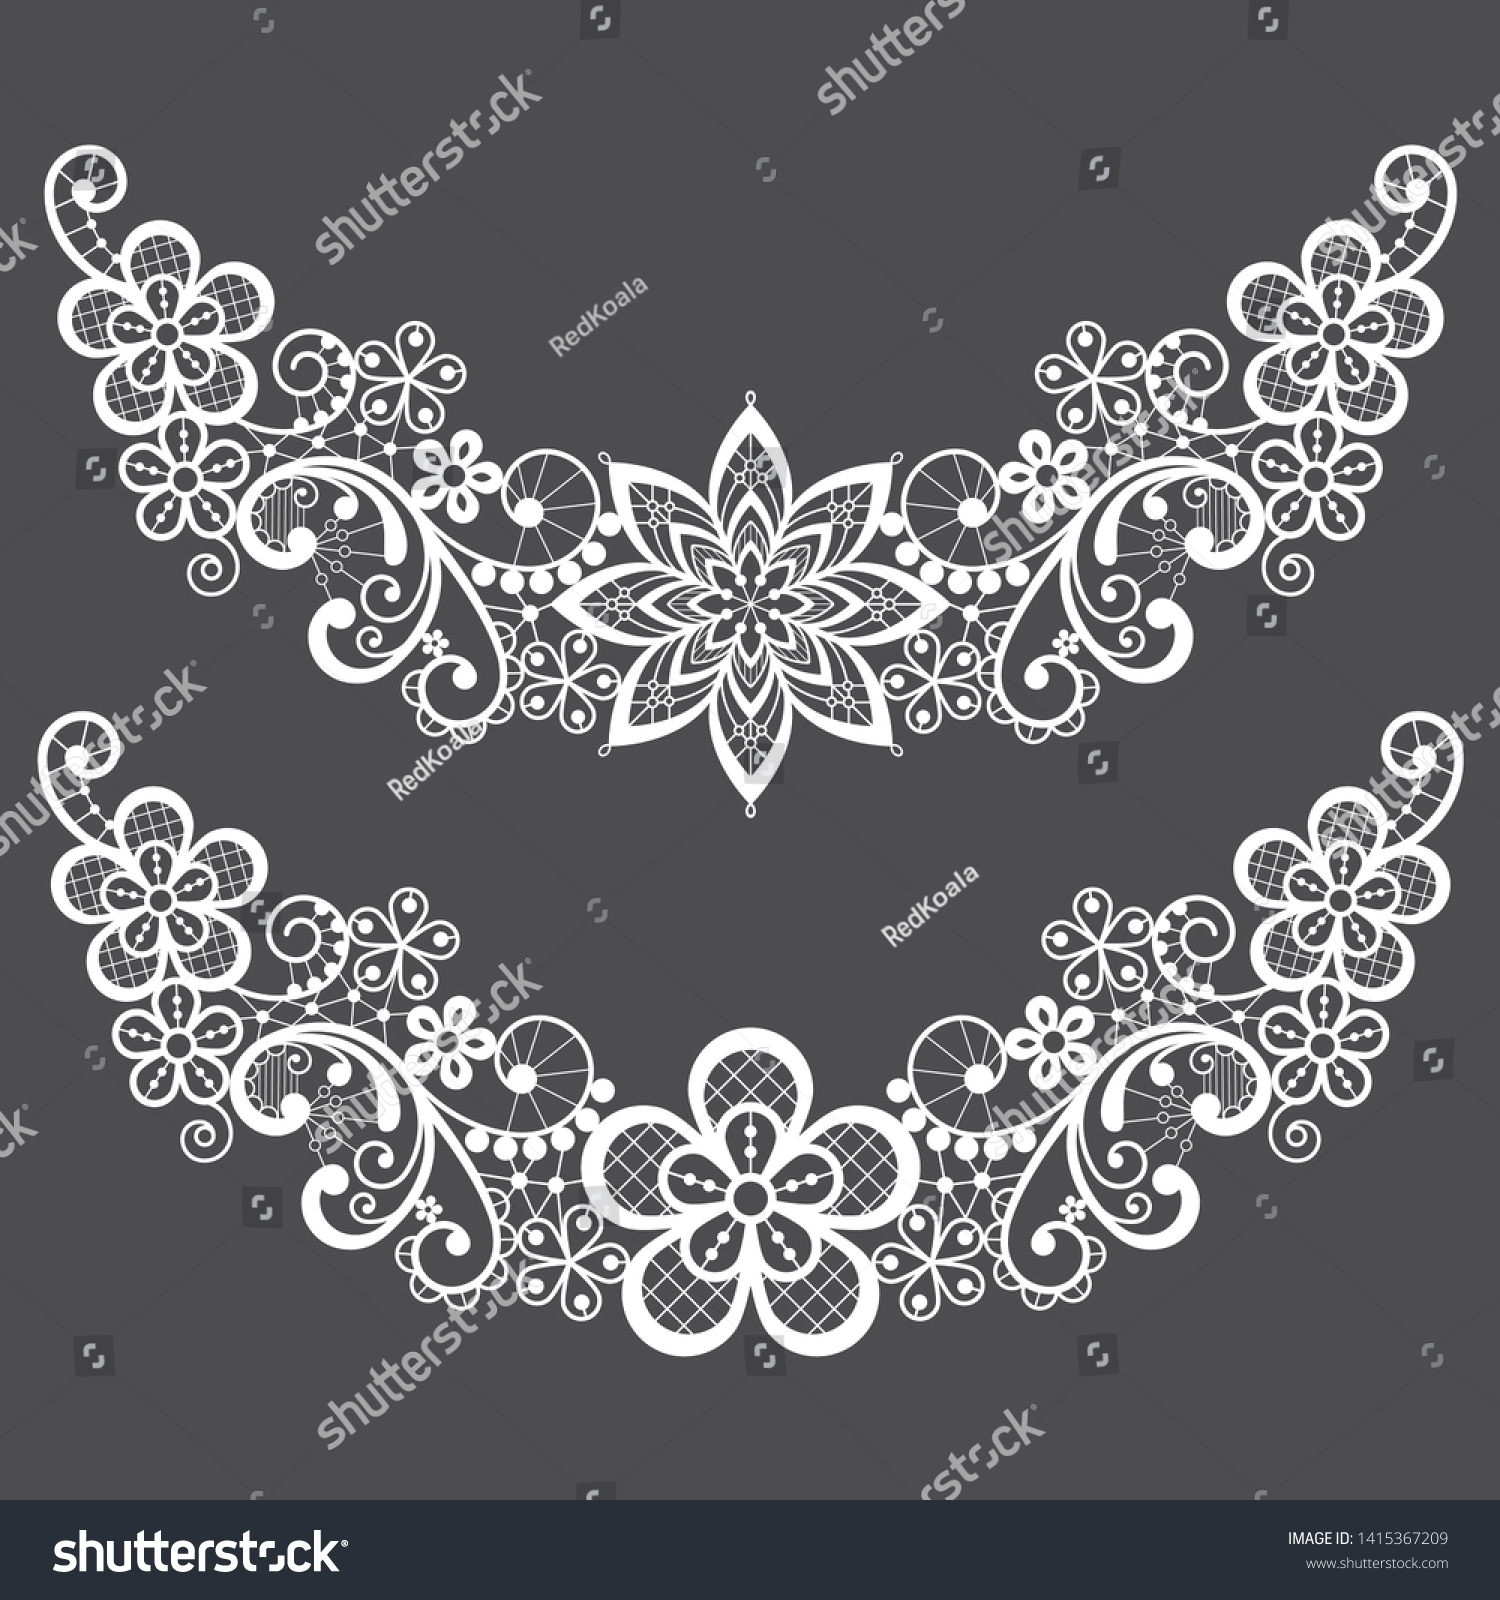 SVG of Vitnahe lace half wreath single vector pattern set - floral lace design collection, retro openwork background. Retro detailed ornaments - wedding or Valentine's Day lace decorations, greeting card svg